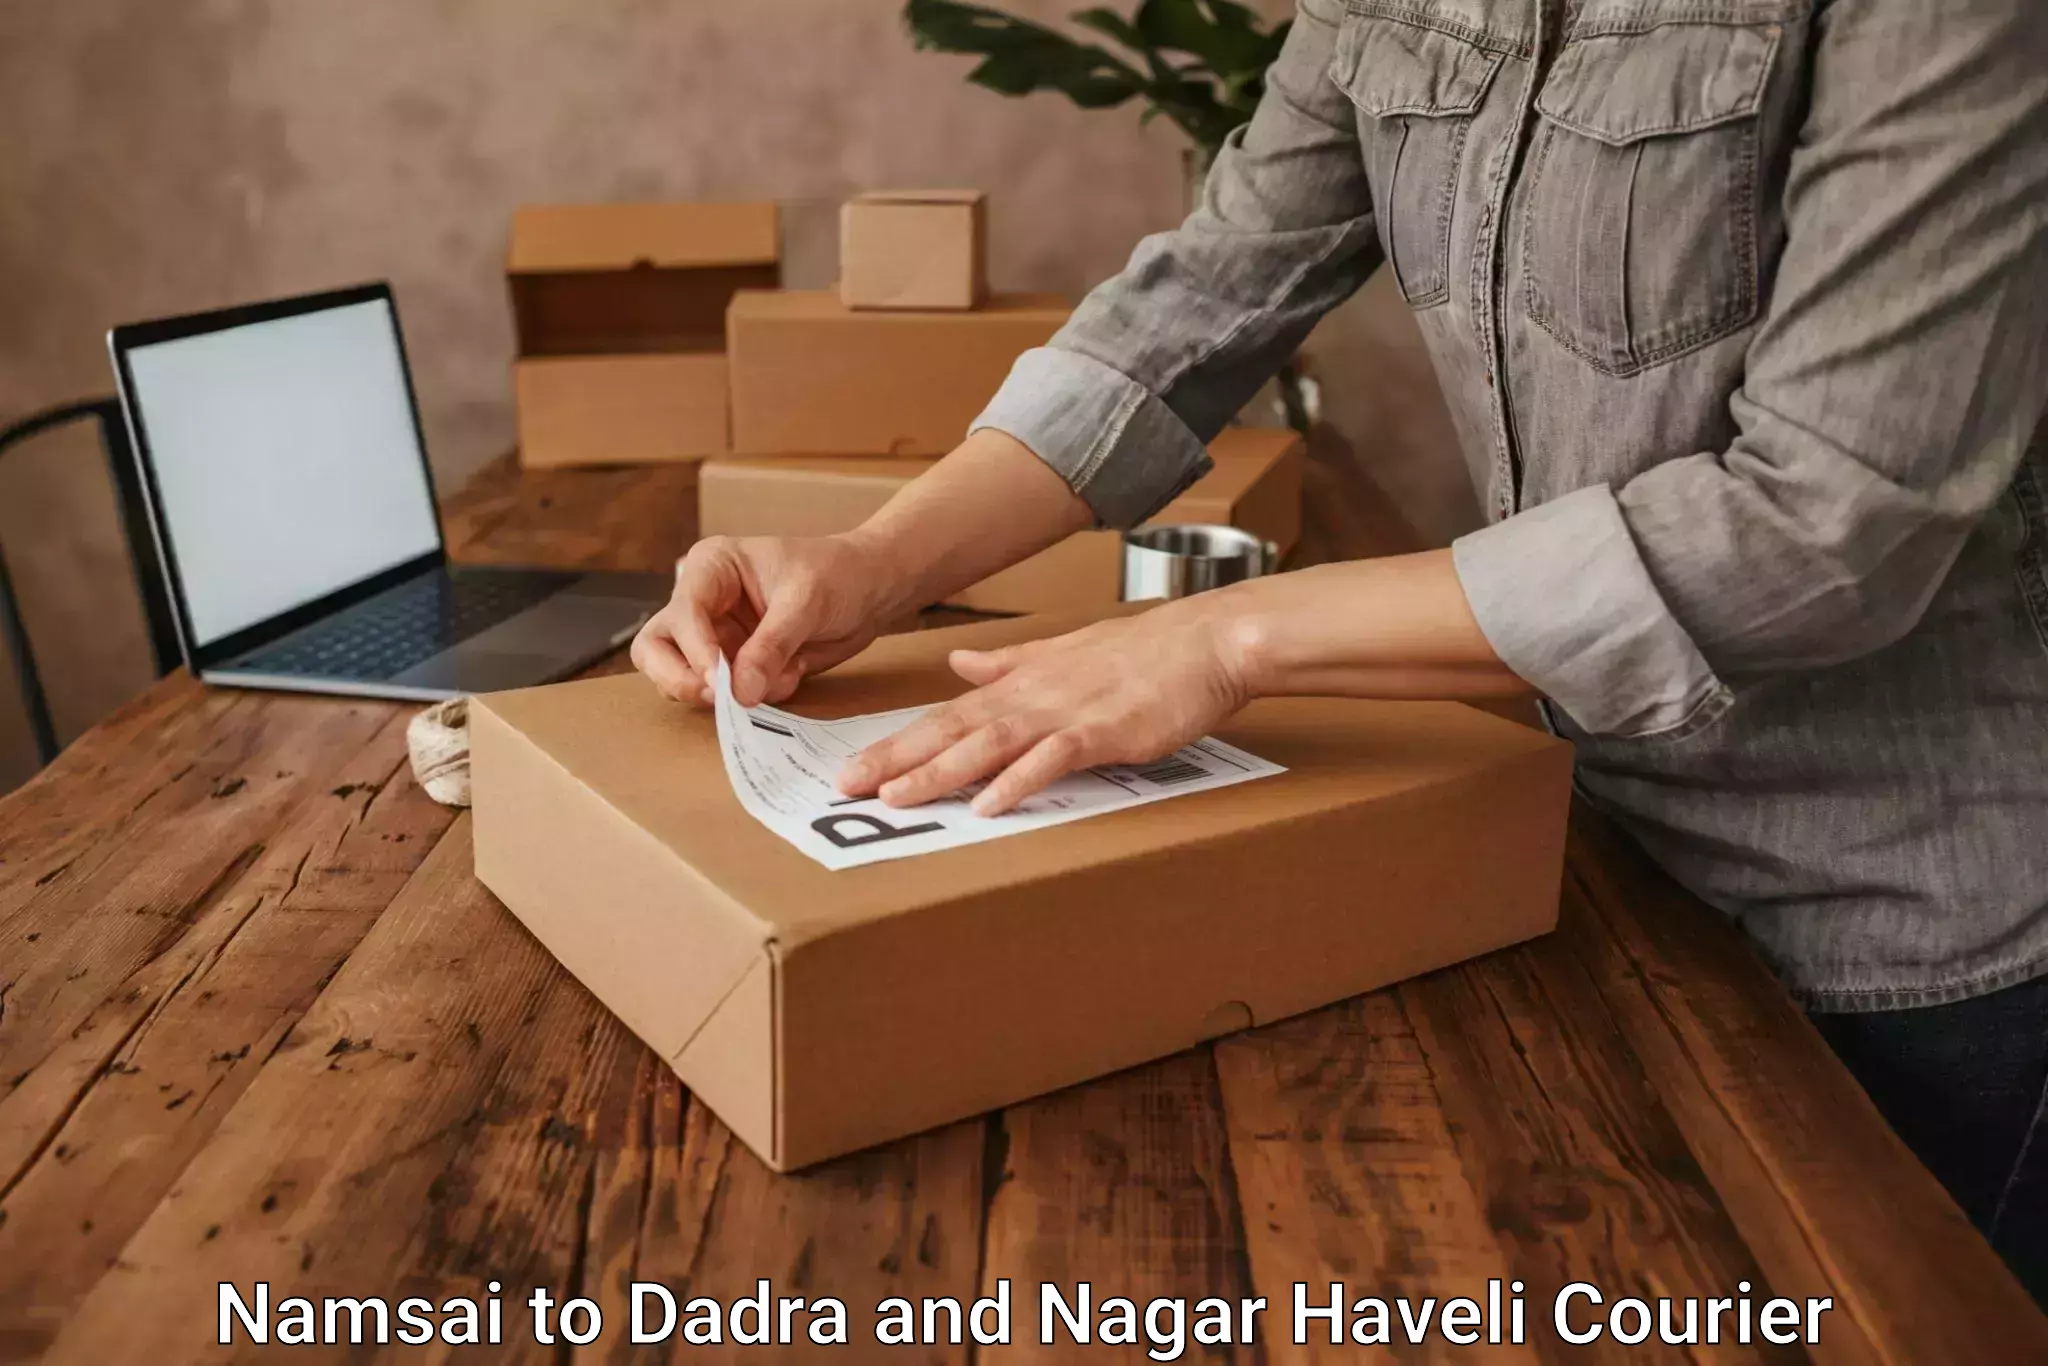 Emergency parcel delivery in Namsai to Dadra and Nagar Haveli